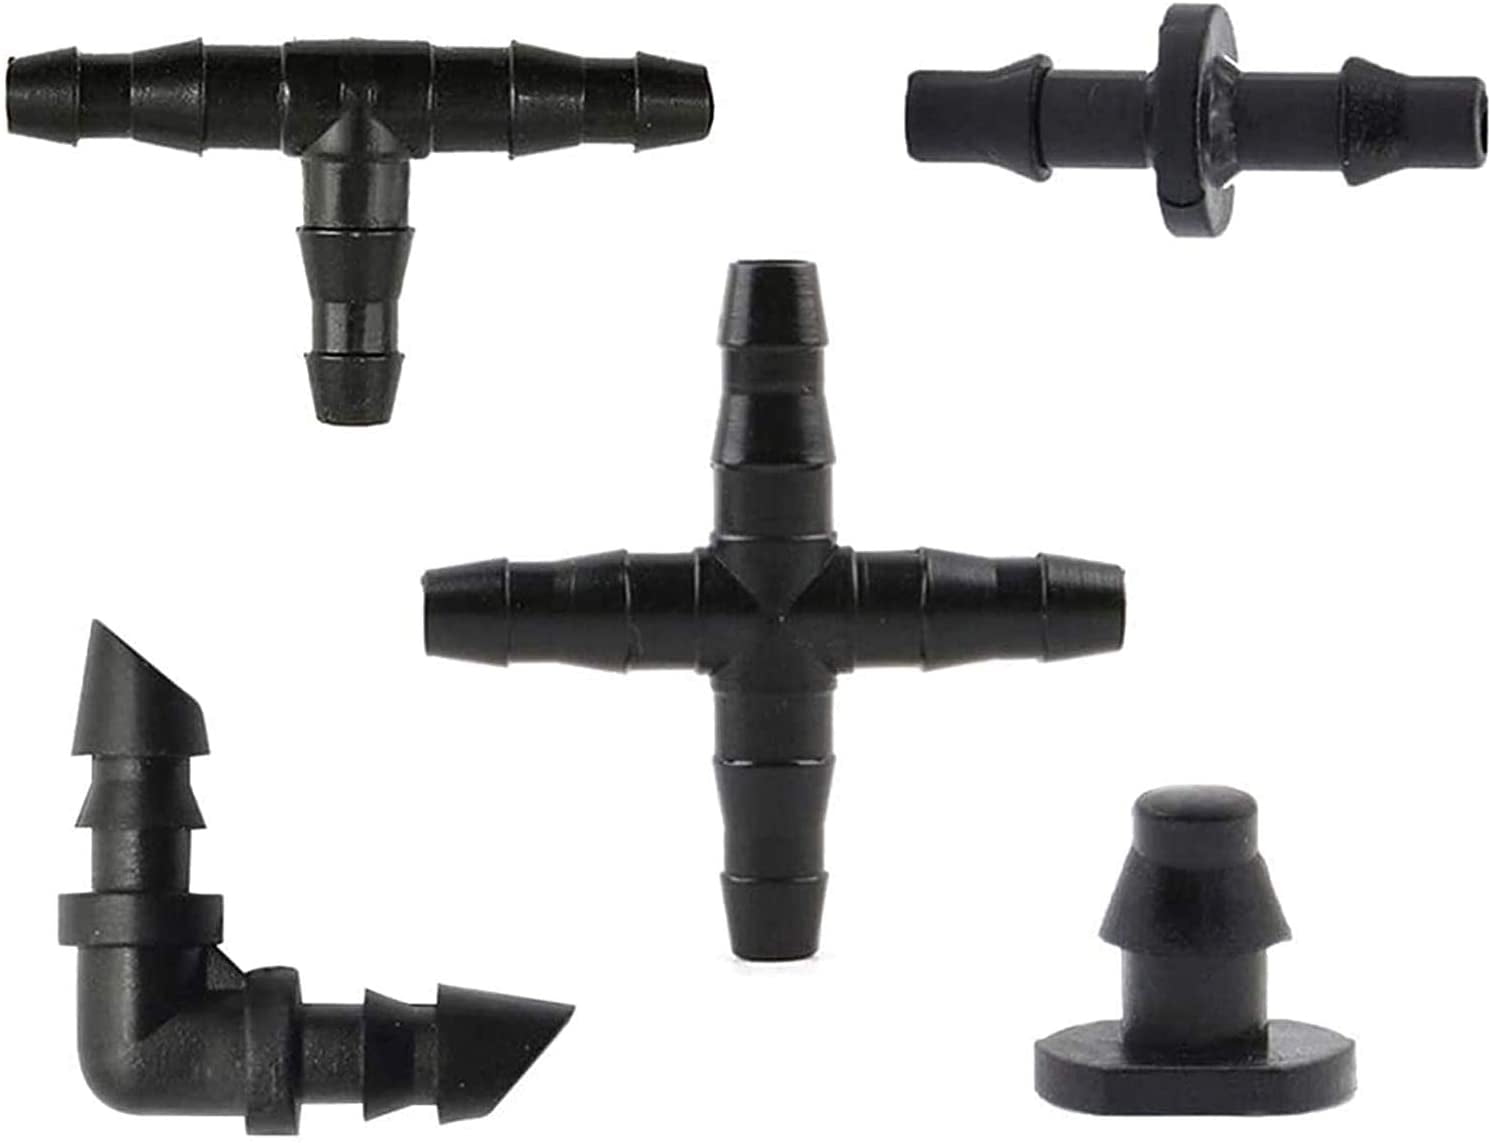 Irrigation Fittings Kit Drip Irrigation Barbed Connectors For 1/4-Inch Hose 